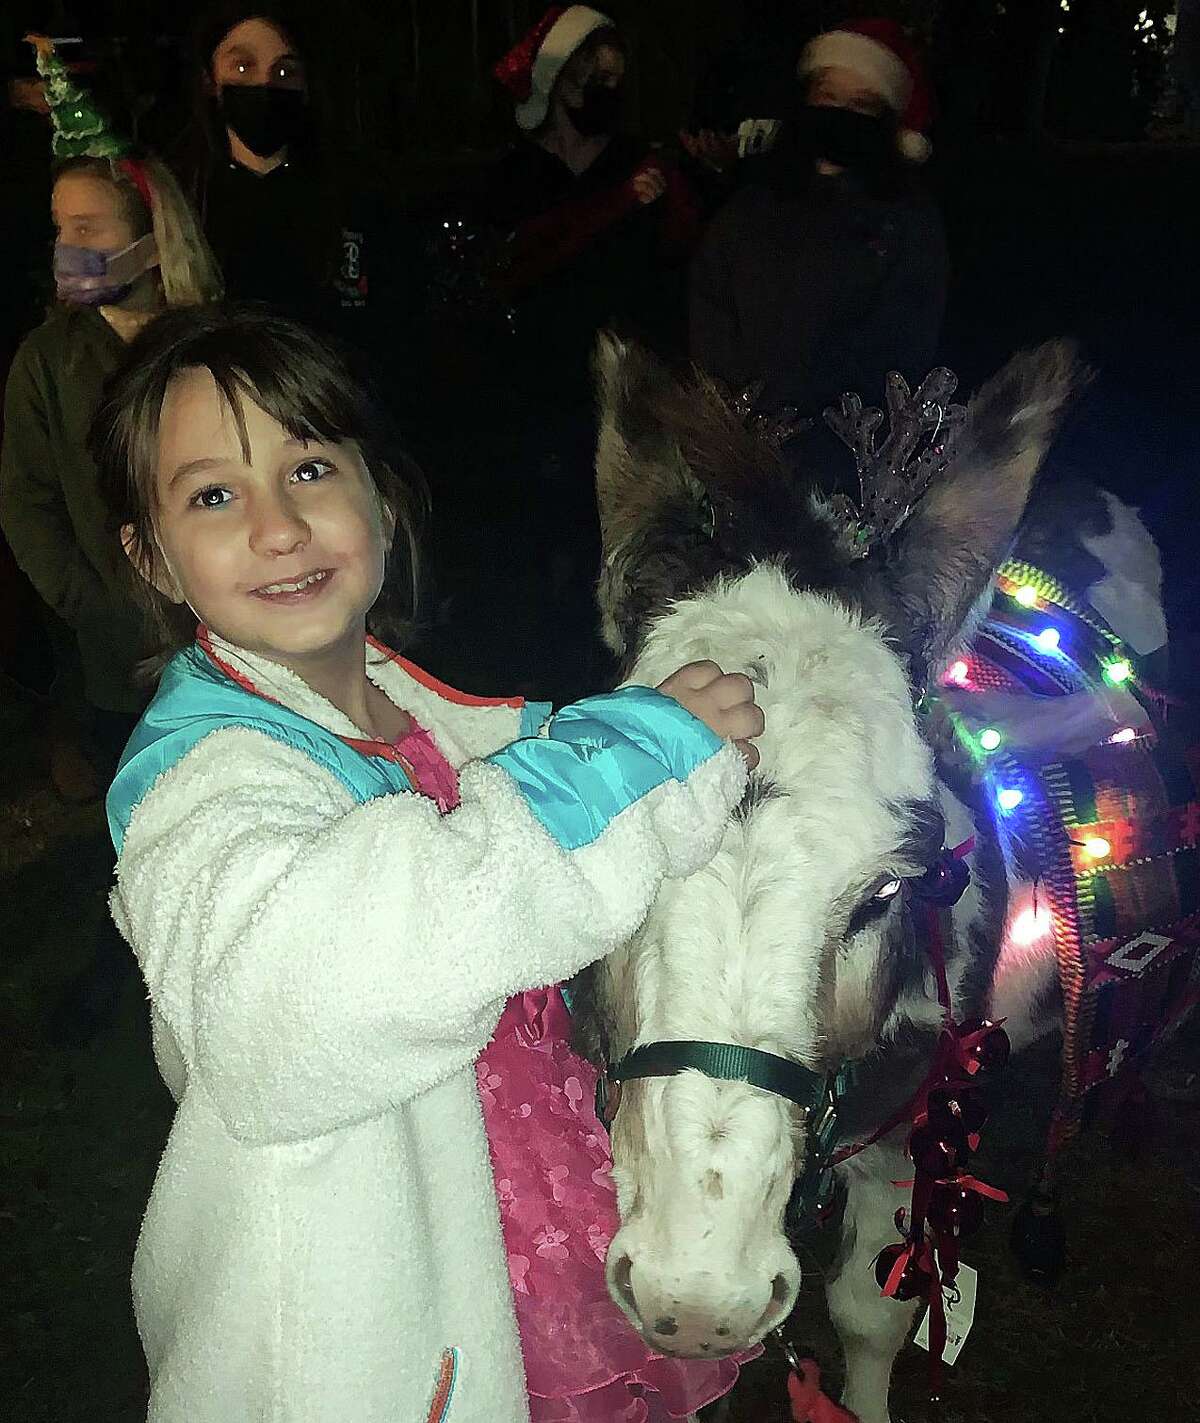 Thanks to a collaboration between Powder Ridge Ski Patrol and Hearts healed by horses in Durham, Evie Forchielli got to ride a reindeer donkey in her front yard.